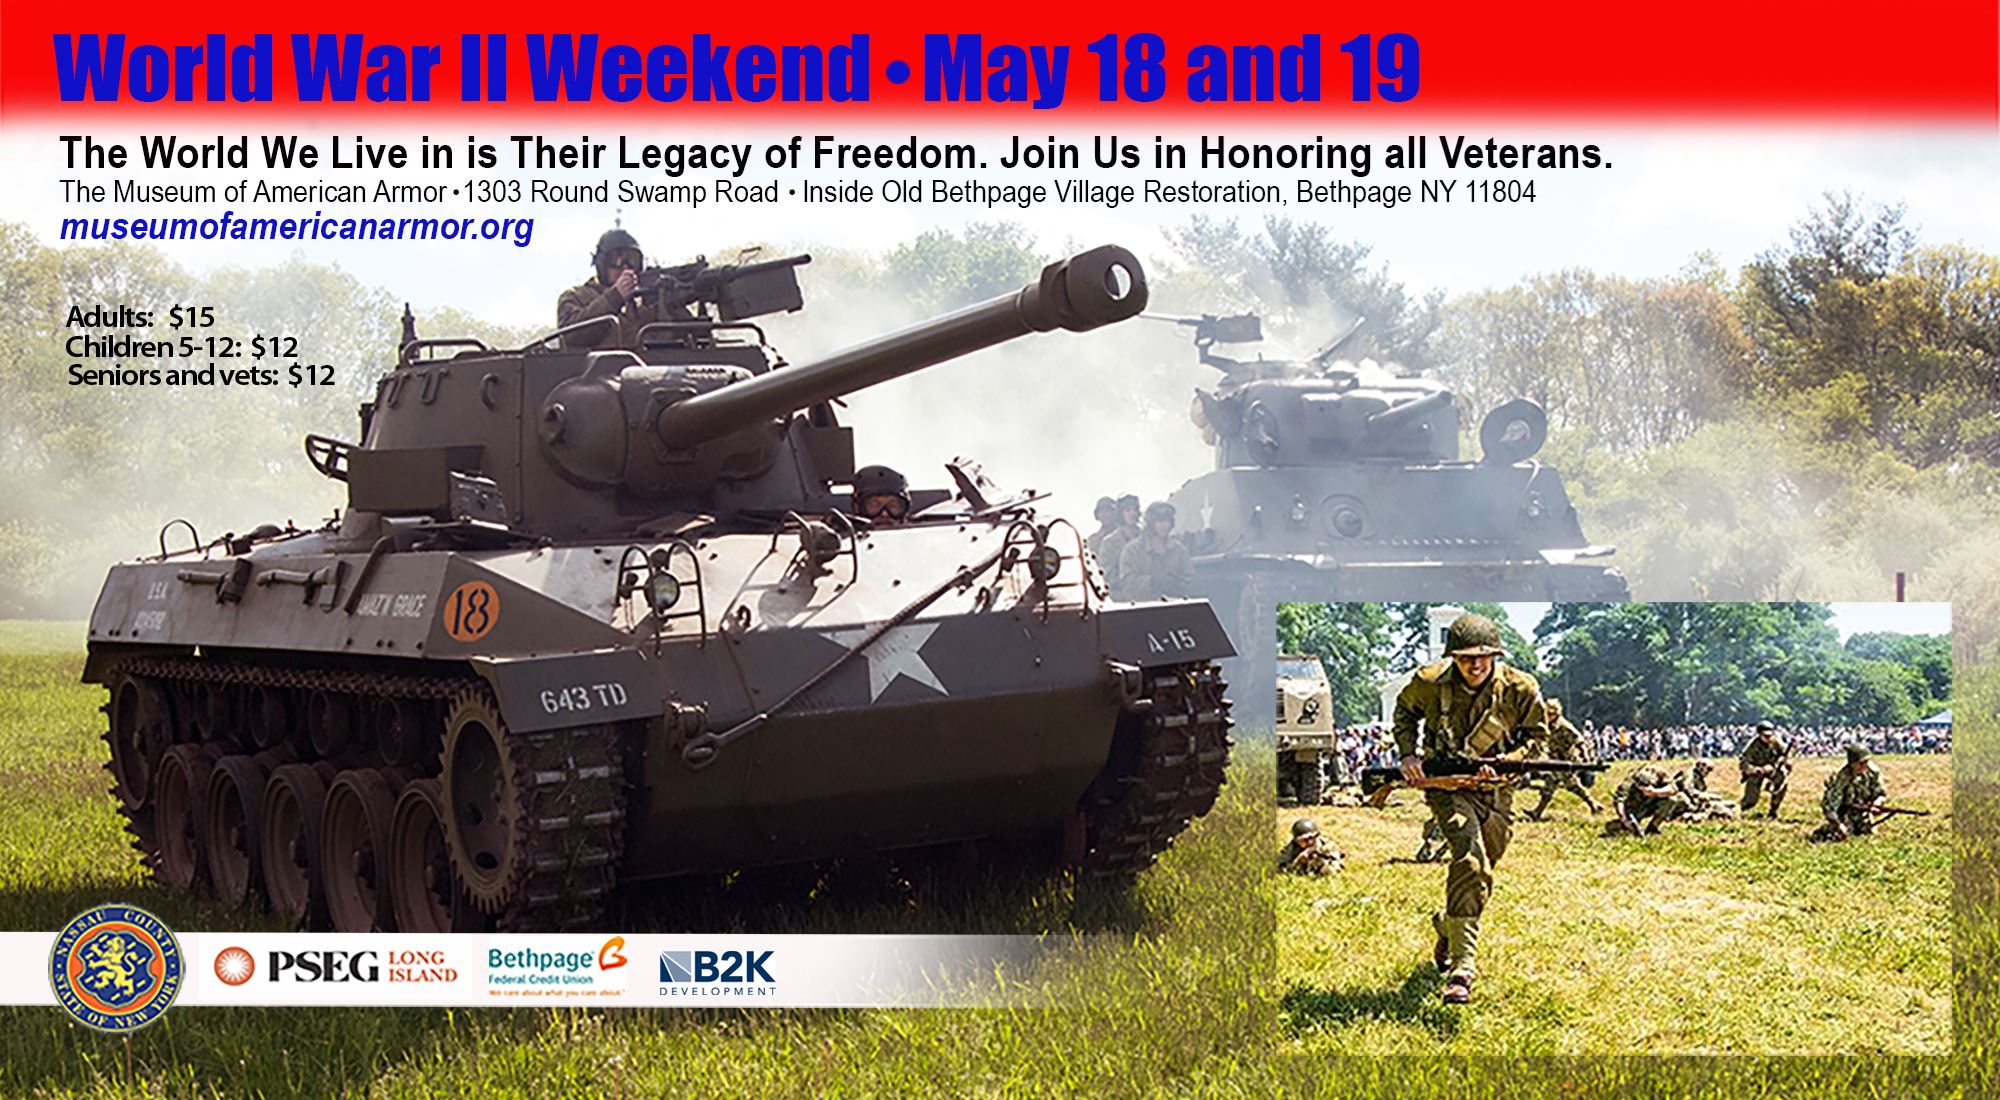 WW2 Armor Museum Weekend at The Museum of American Armor: 1303 Round Swamp Road, 5/18 and 5/19